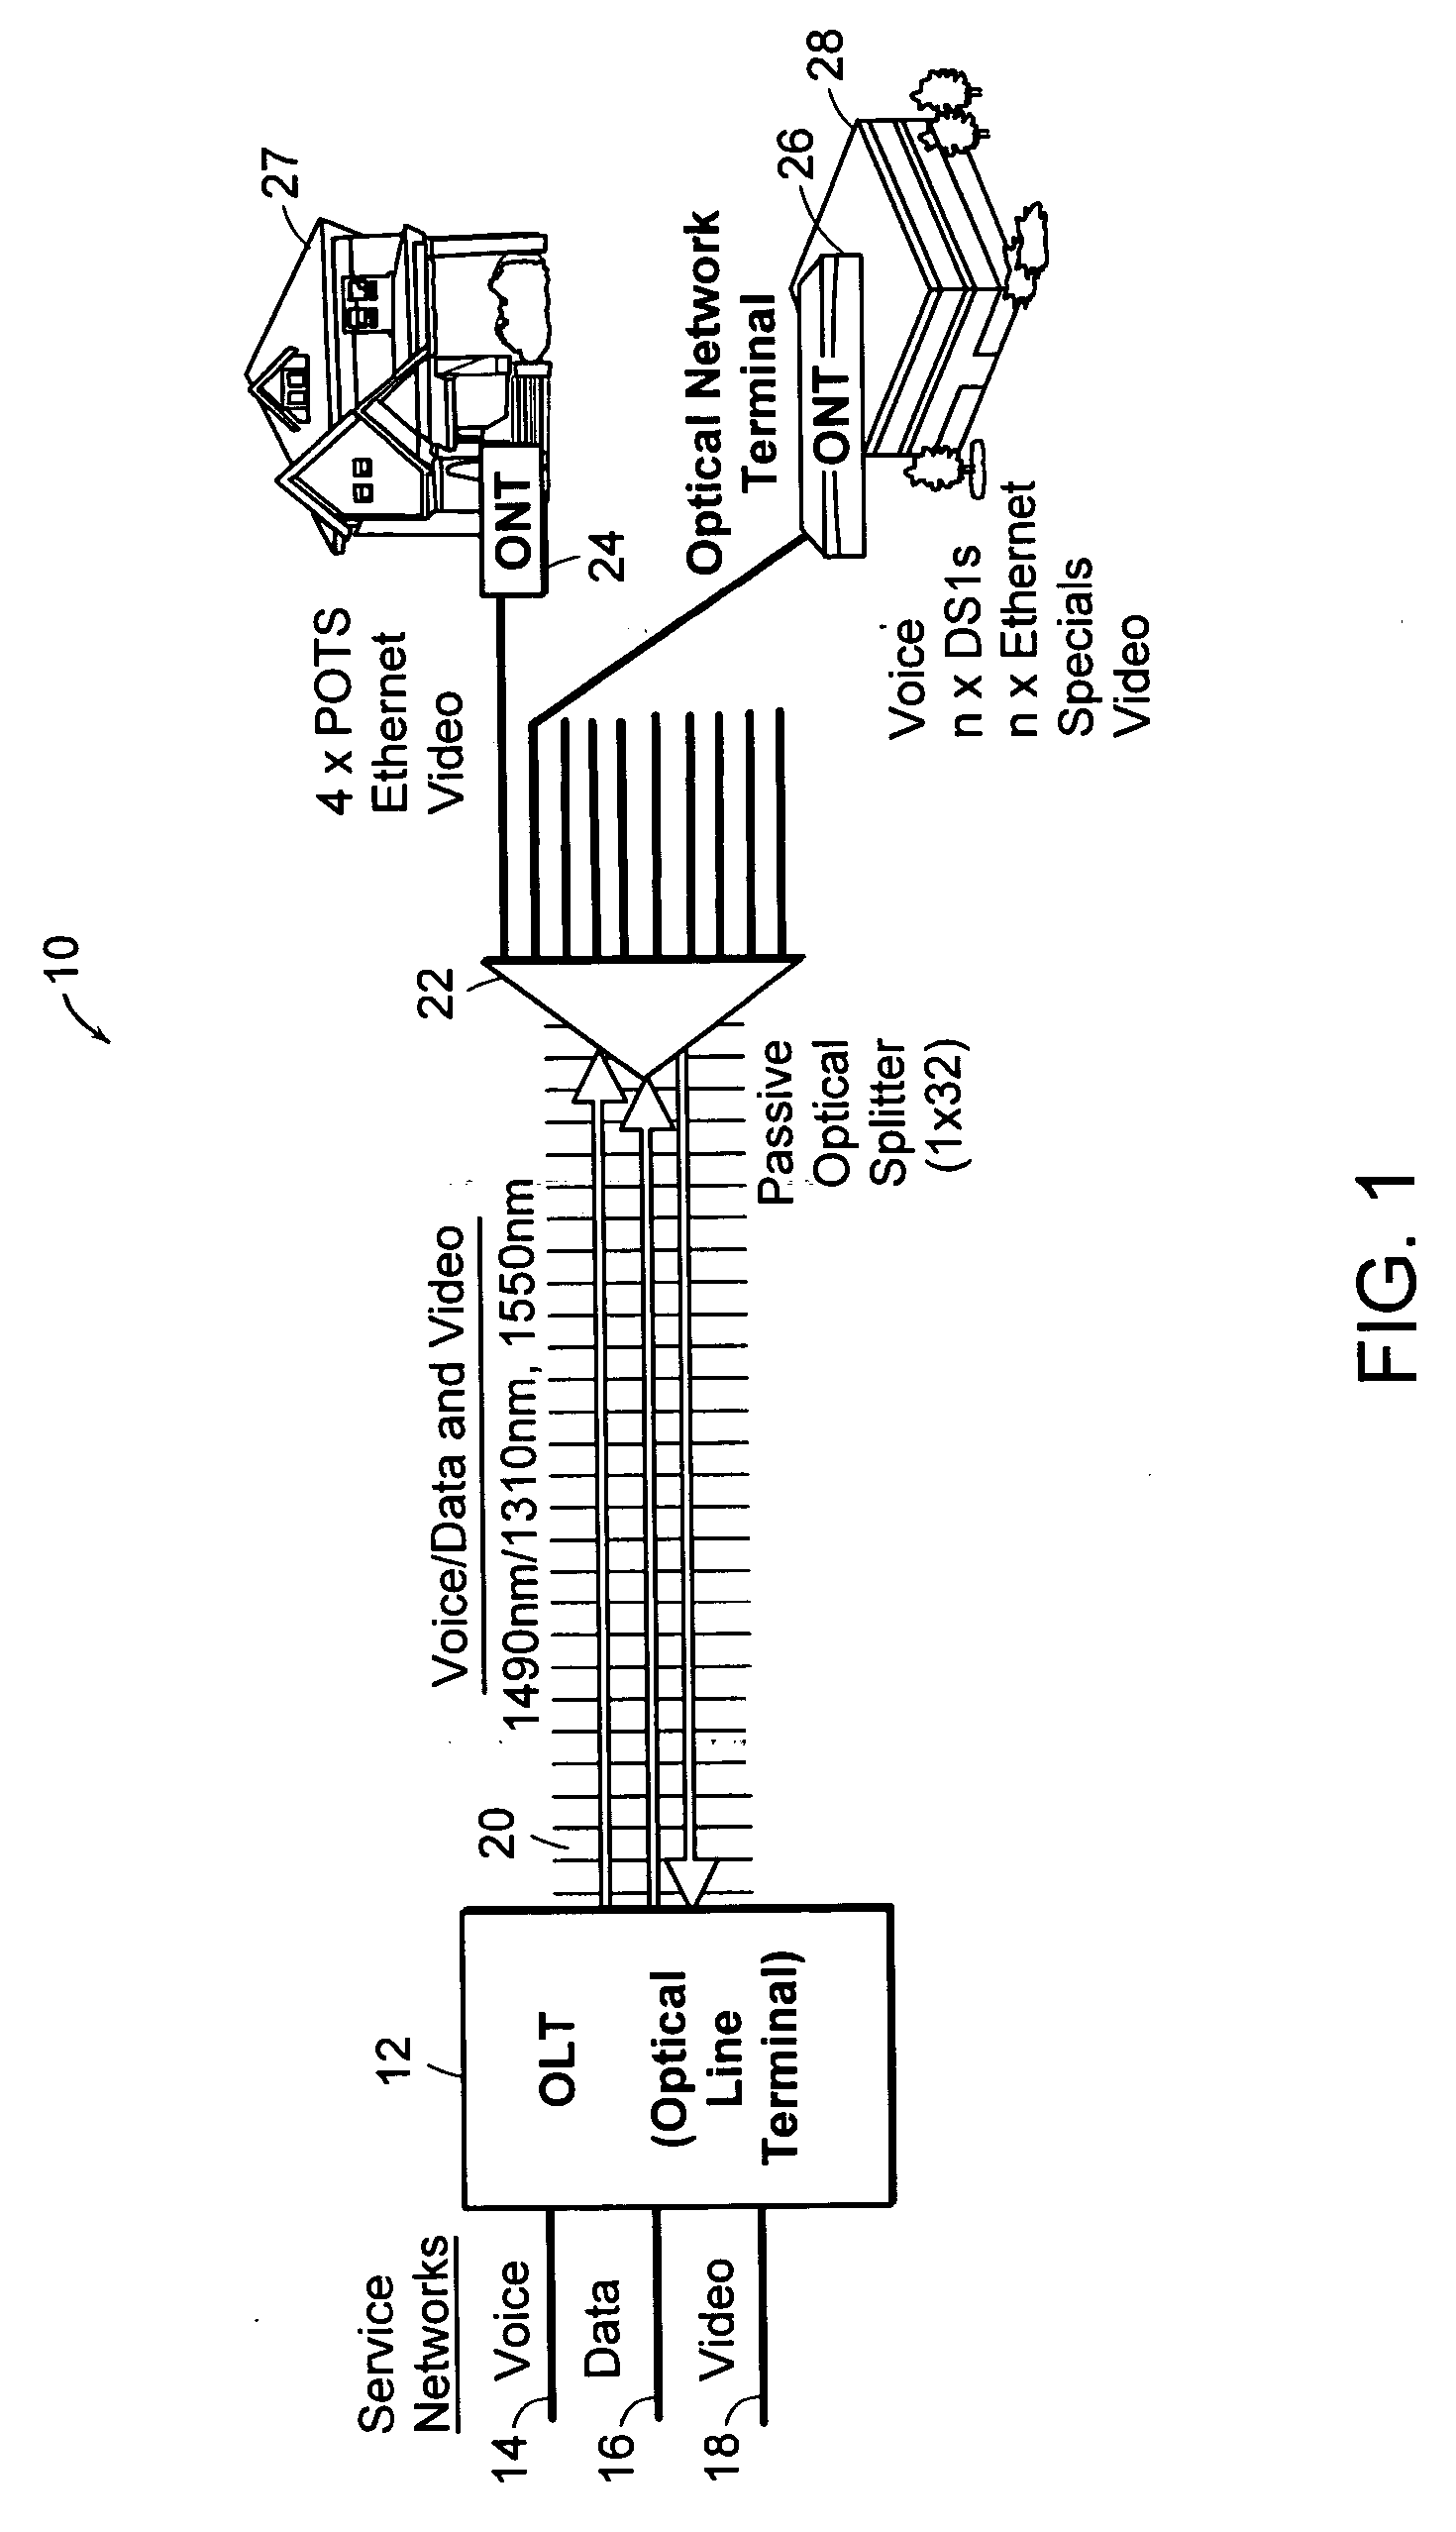 Systems and methods for optical fiber distribution and management